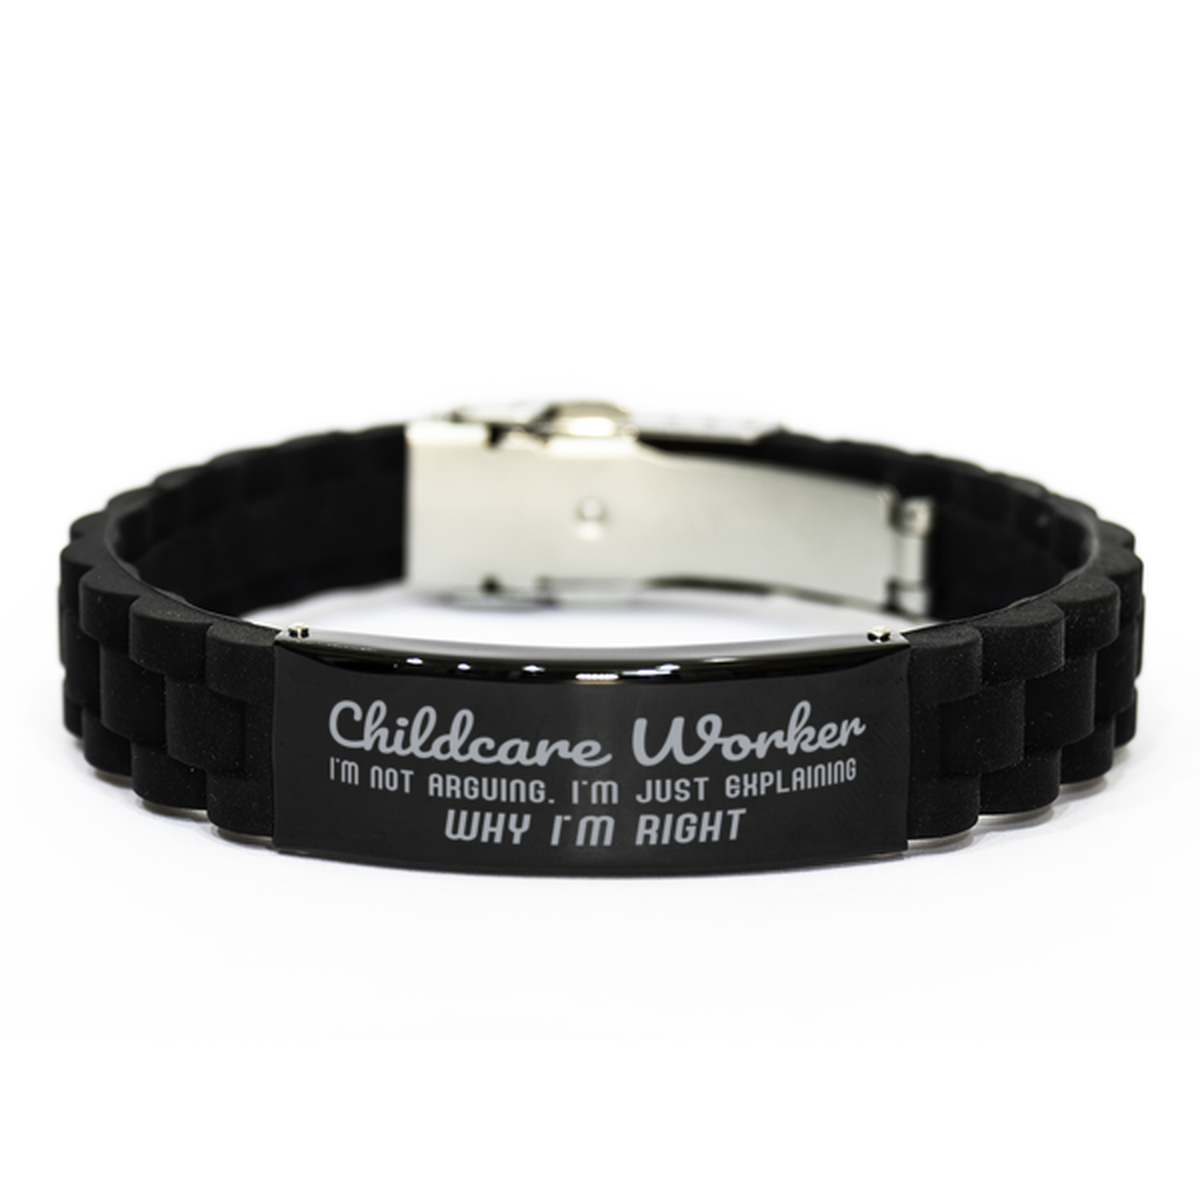 Childcare Worker I'm not Arguing. I'm Just Explaining Why I'm RIGHT Black Glidelock Clasp Bracelet, Funny Saying Quote Childcare Worker Gifts For Childcare Worker Graduation Birthday Christmas Gifts for Men Women Coworker